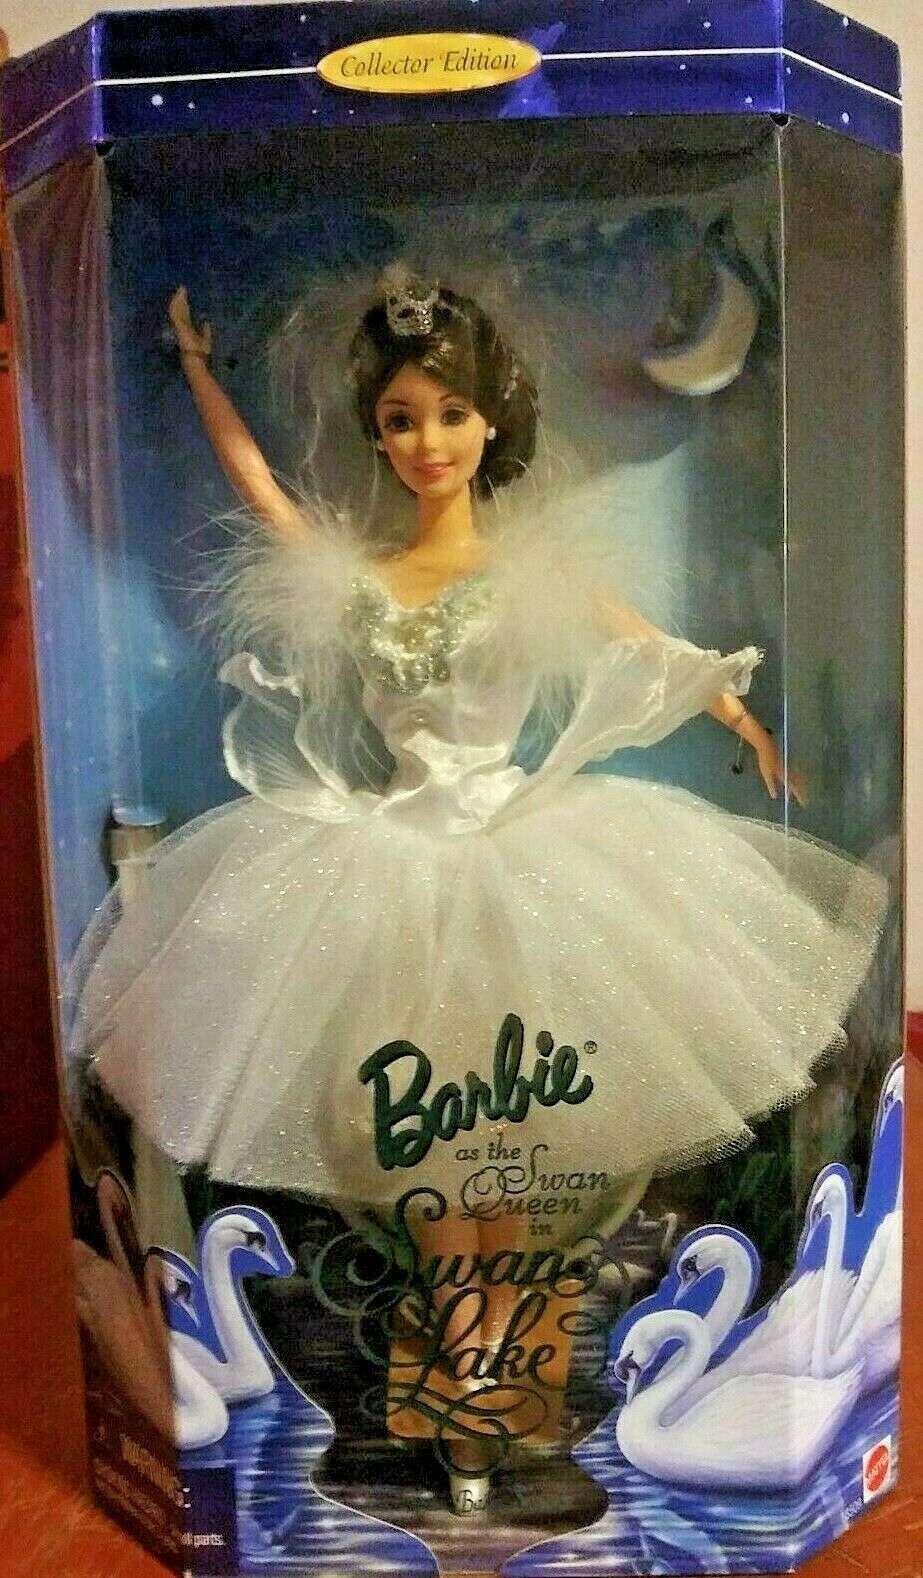 1997 Swan Lake Queen Barbie Doll Nrfb 18589 Classic Ballet Series By Mattel